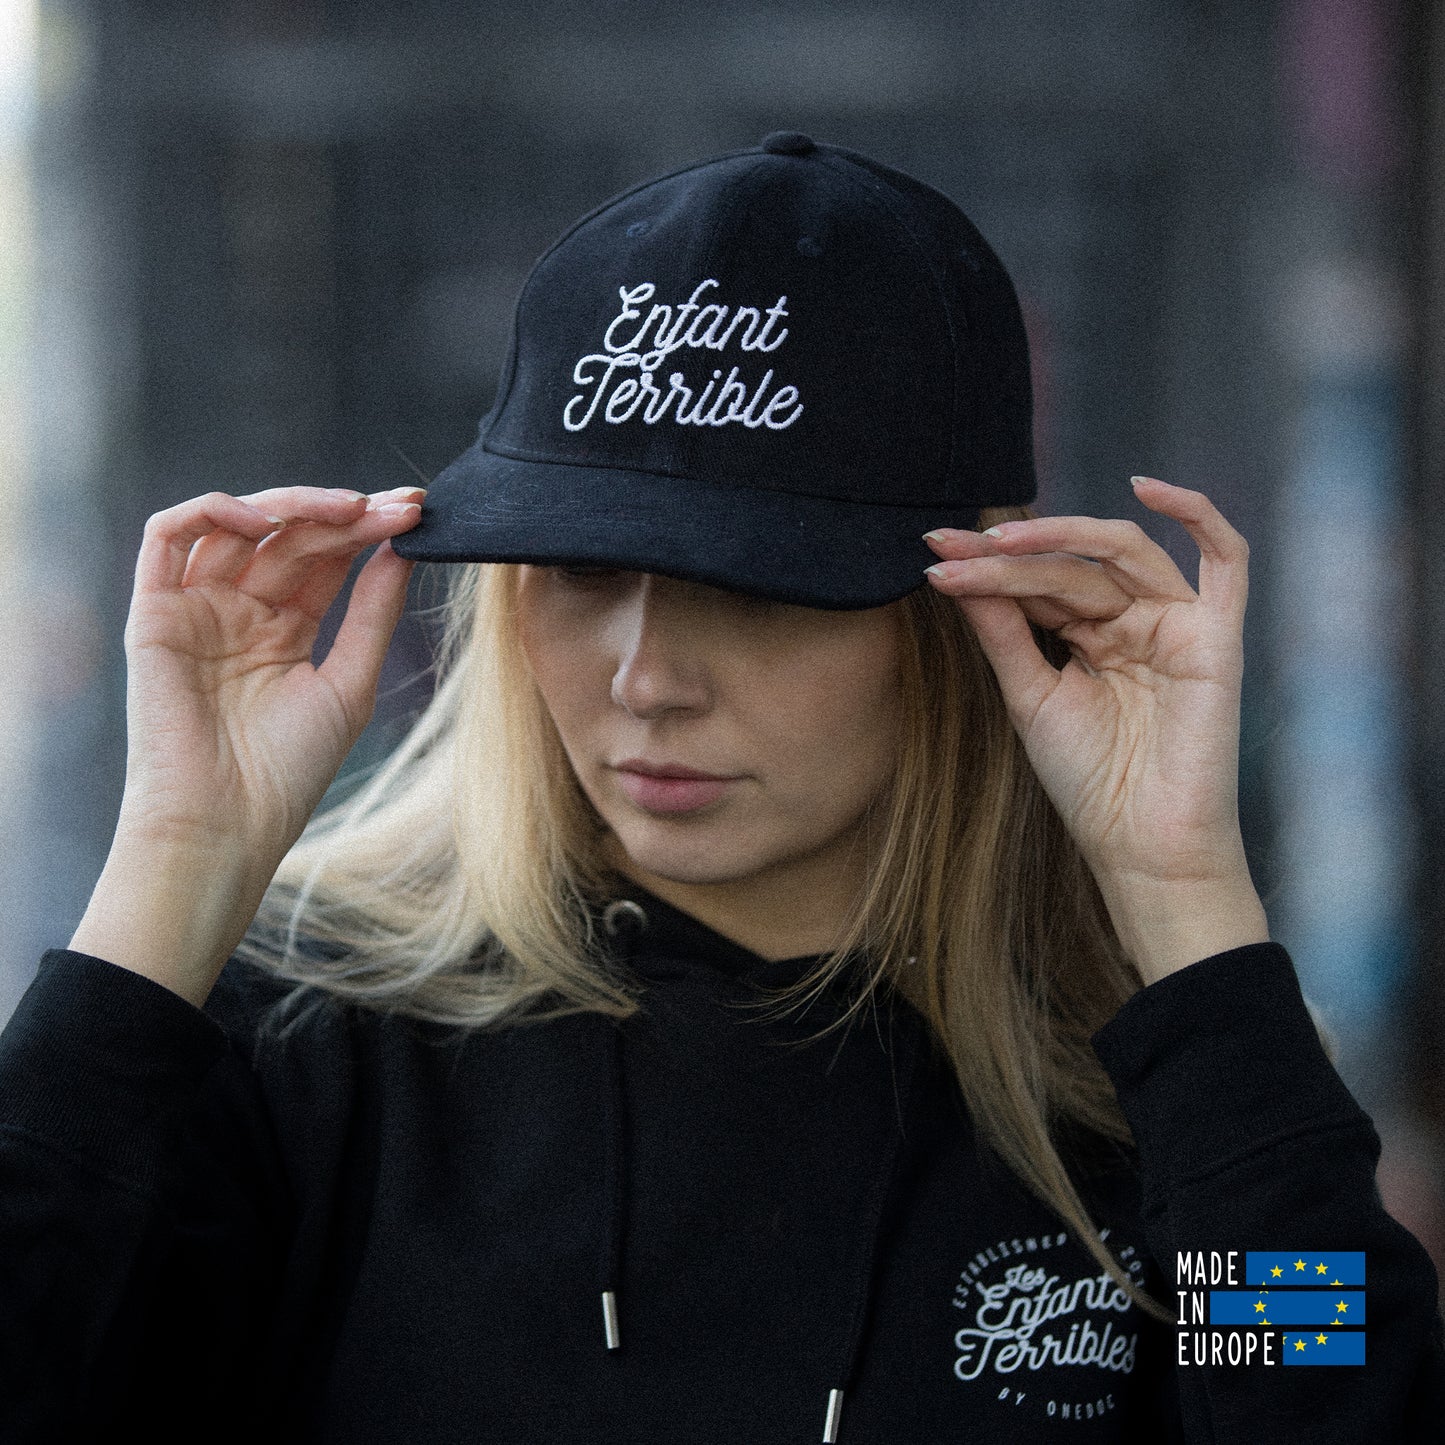 Black cap with embroidery "Enfant Terrible"